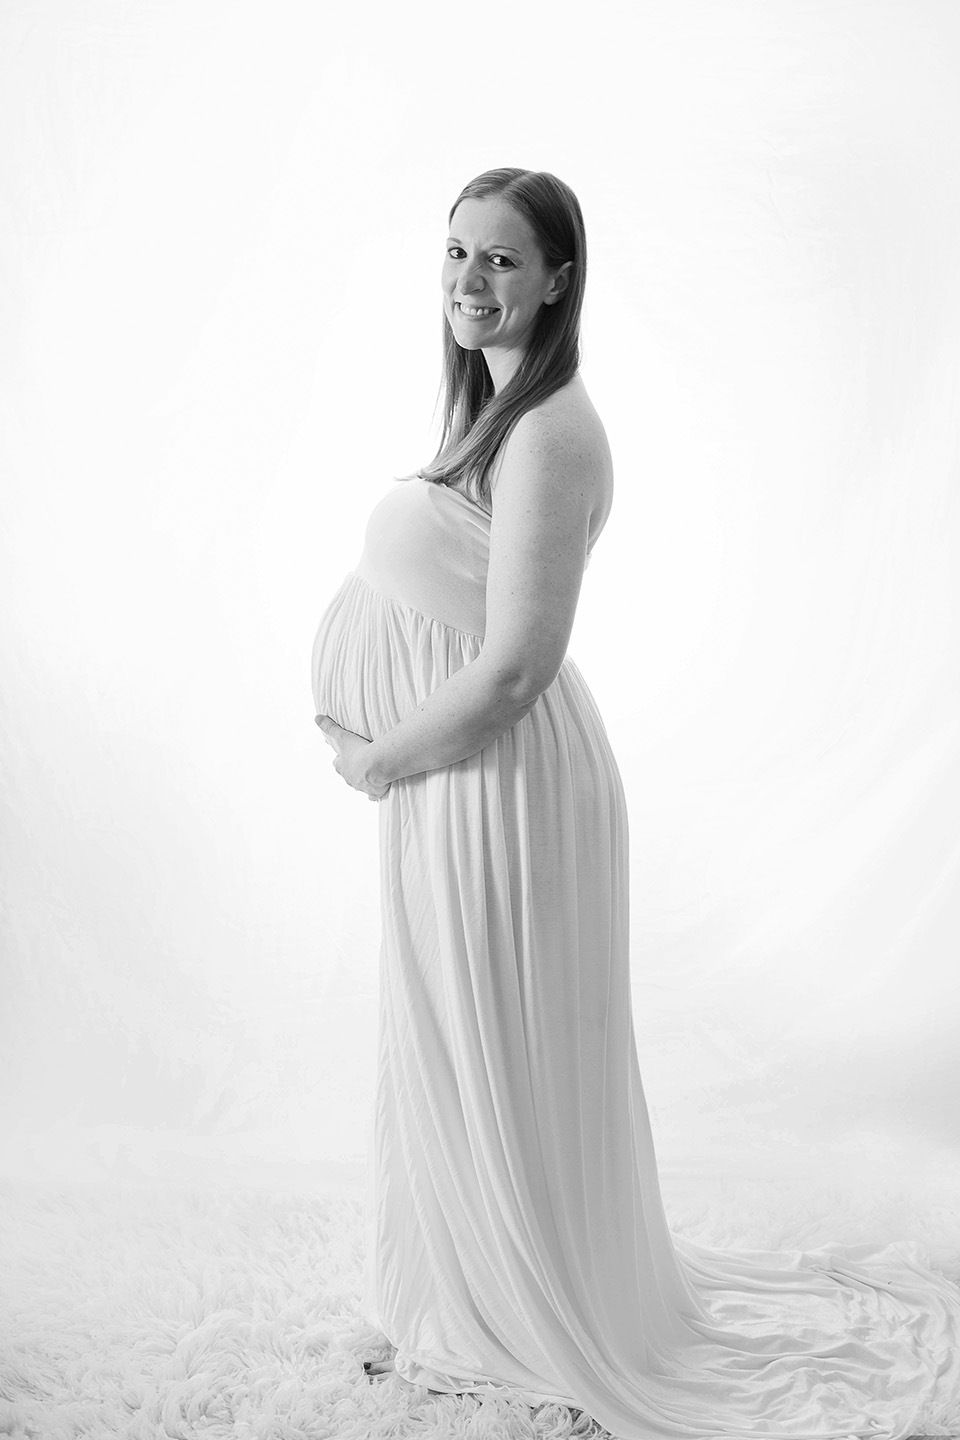 Maternity portraits in Cincinnati OH, Mischief and Laughs Photography